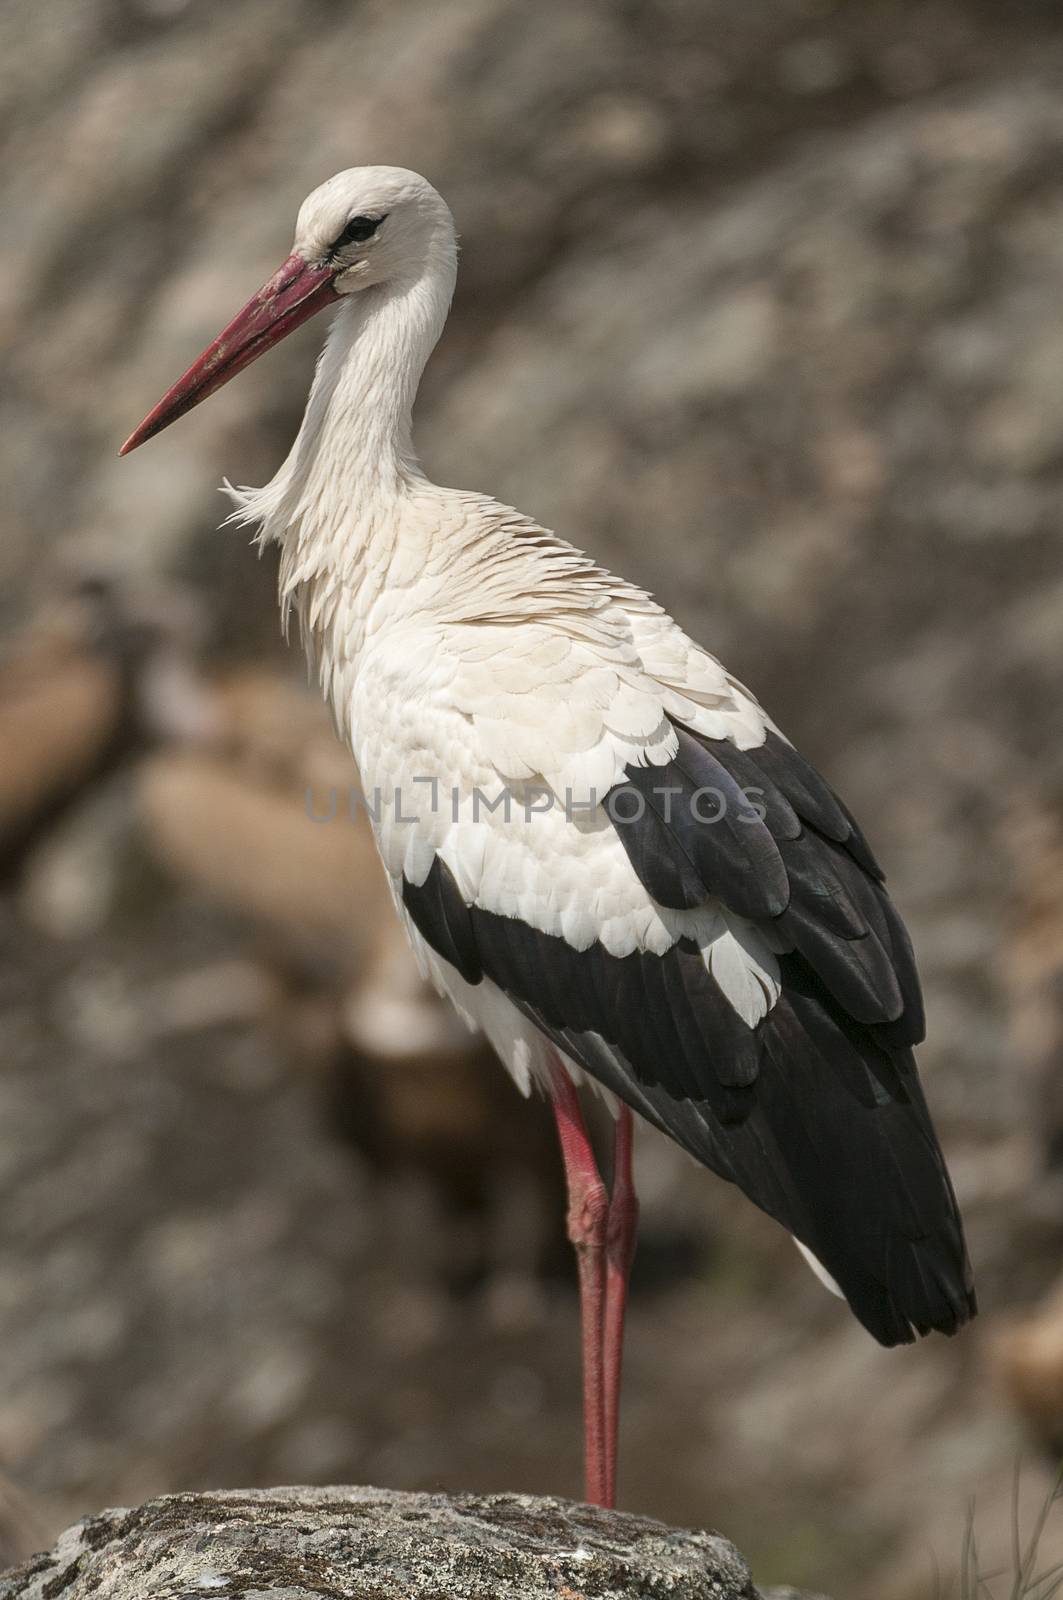 White stork standing on the rocks (Ciconia ciconia) by jalonsohu@gmail.com